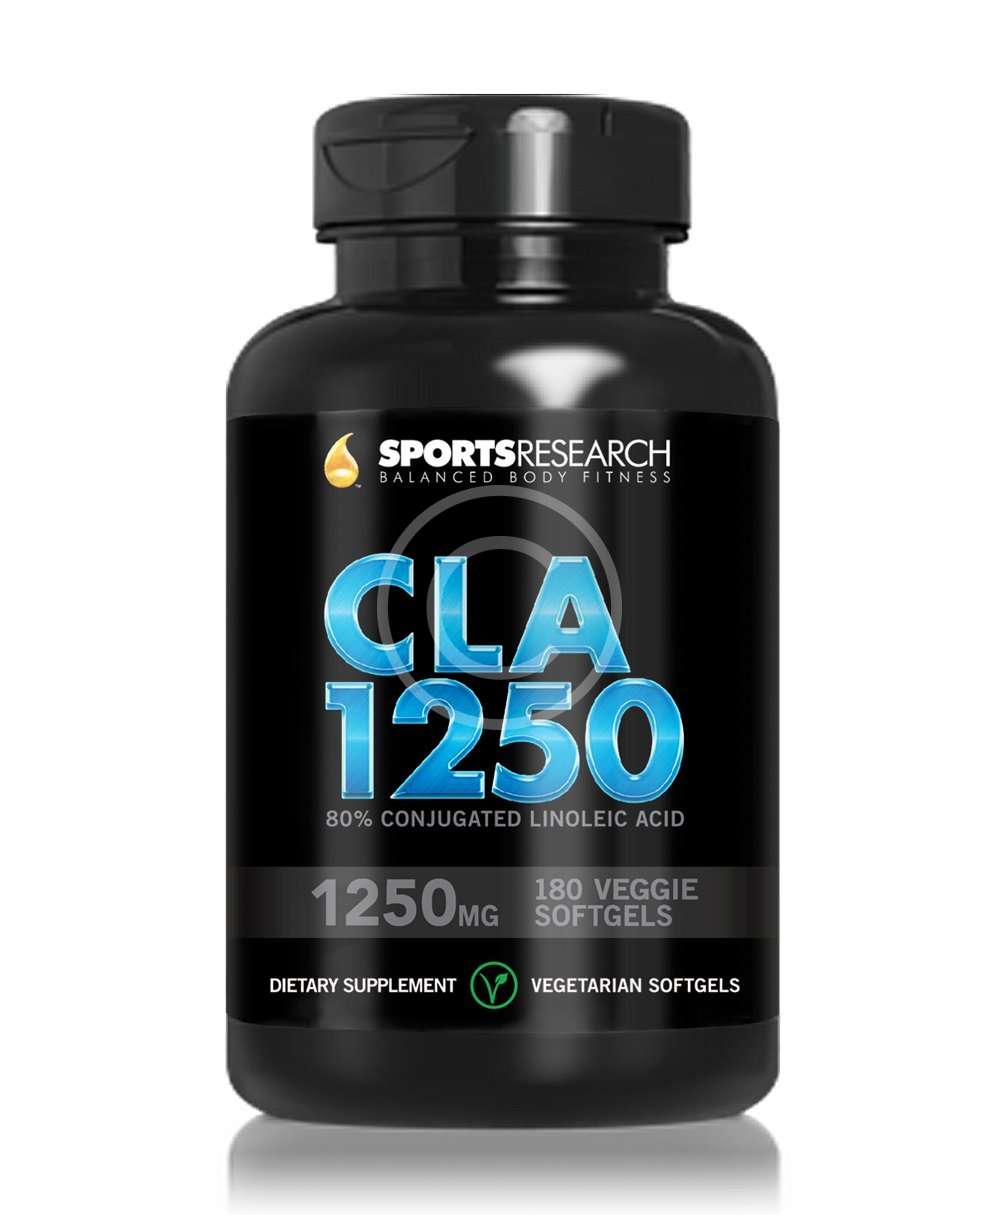 Sport research. Nutrition, CLA 1250, 180 Softgels. CLA 1250 Max Potency. Conjugated Linoleic acid. Sports research, CLA 1250, Max Potency, 1,250 MG, 180 Softgels в аптеке.